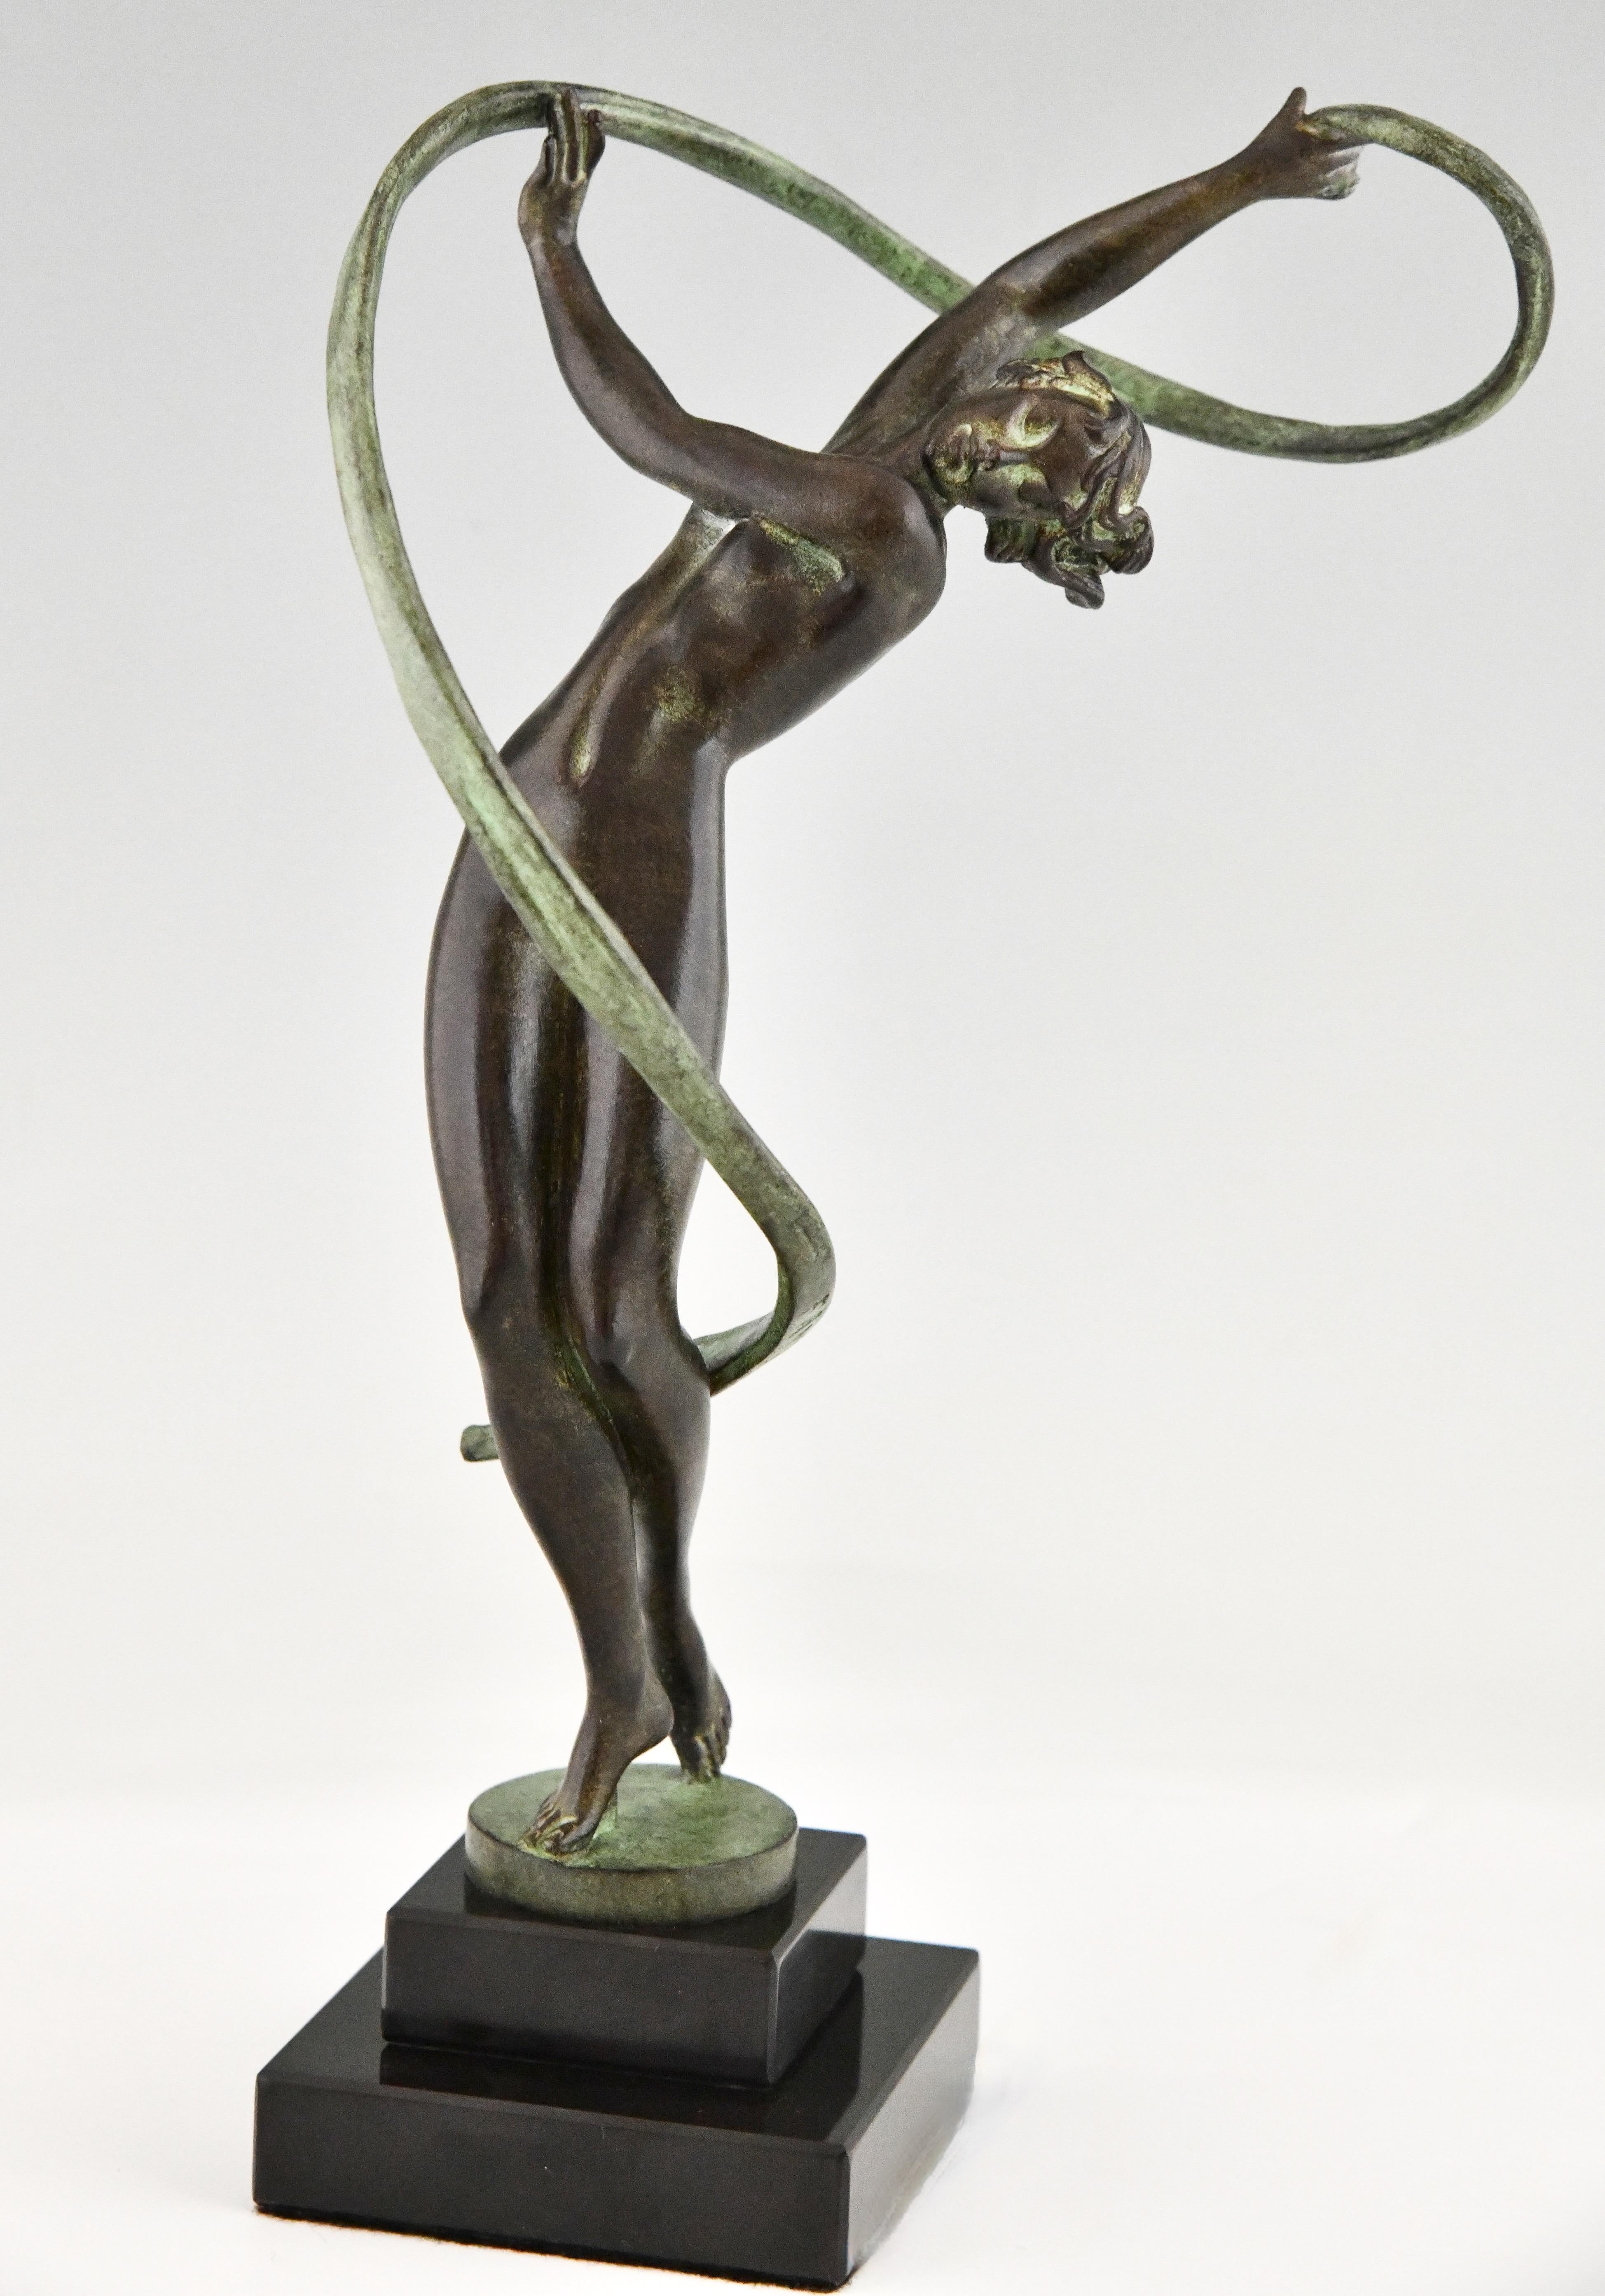 Art Deco style sculpture dancer Tourbillon, nude with ribbon by Fayral, pseudonym of Pierre Le Faguays. 
With the Le Verrier foundry mark. 
Patinated Art Metal on a black marble base. 
Design 1930.
Posthumous contemporary cast of the Le Verrier